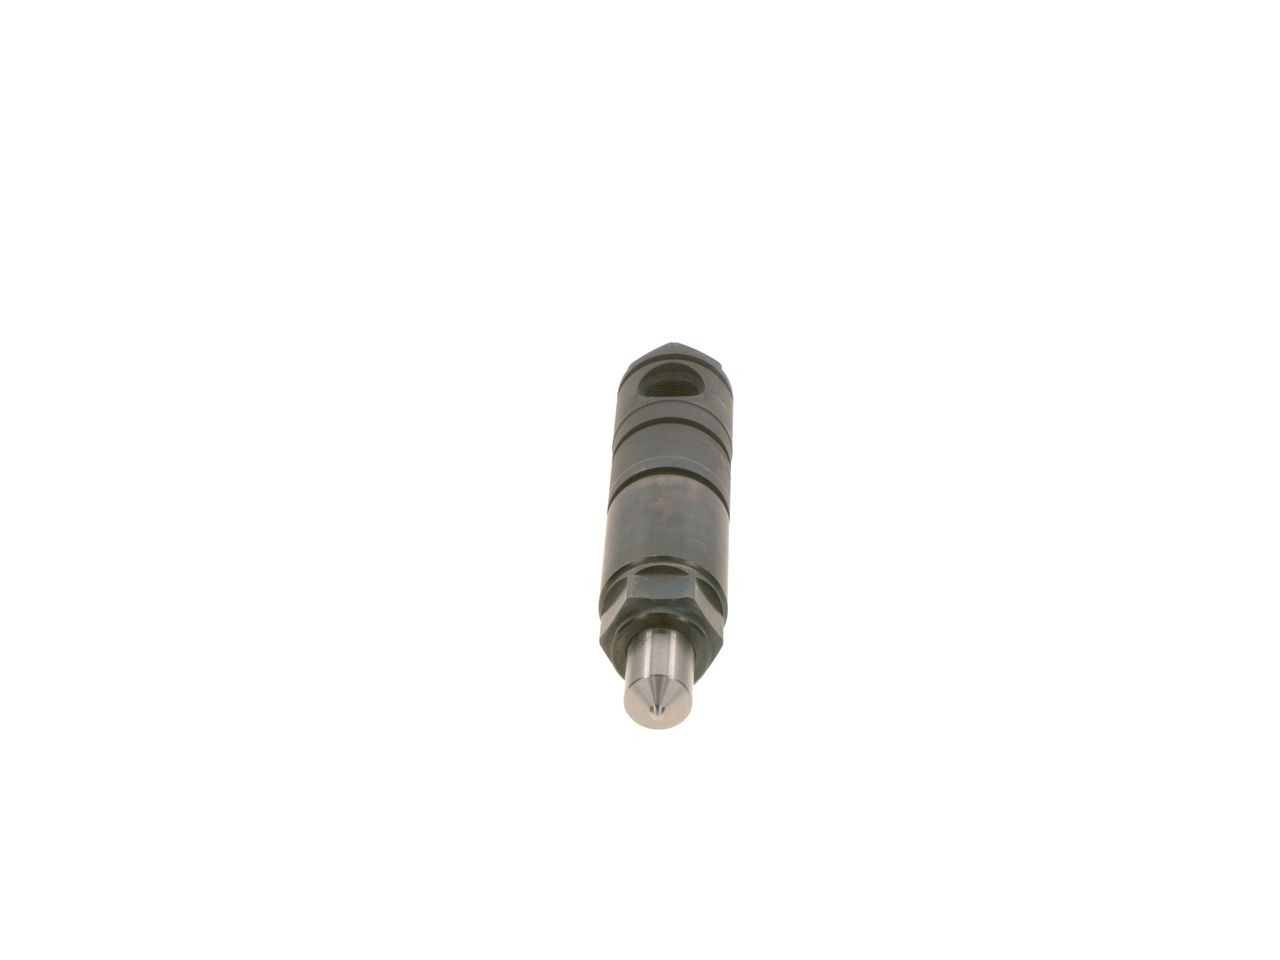 BOSCH Nozzle and Holder Assembly 0 432 490 006